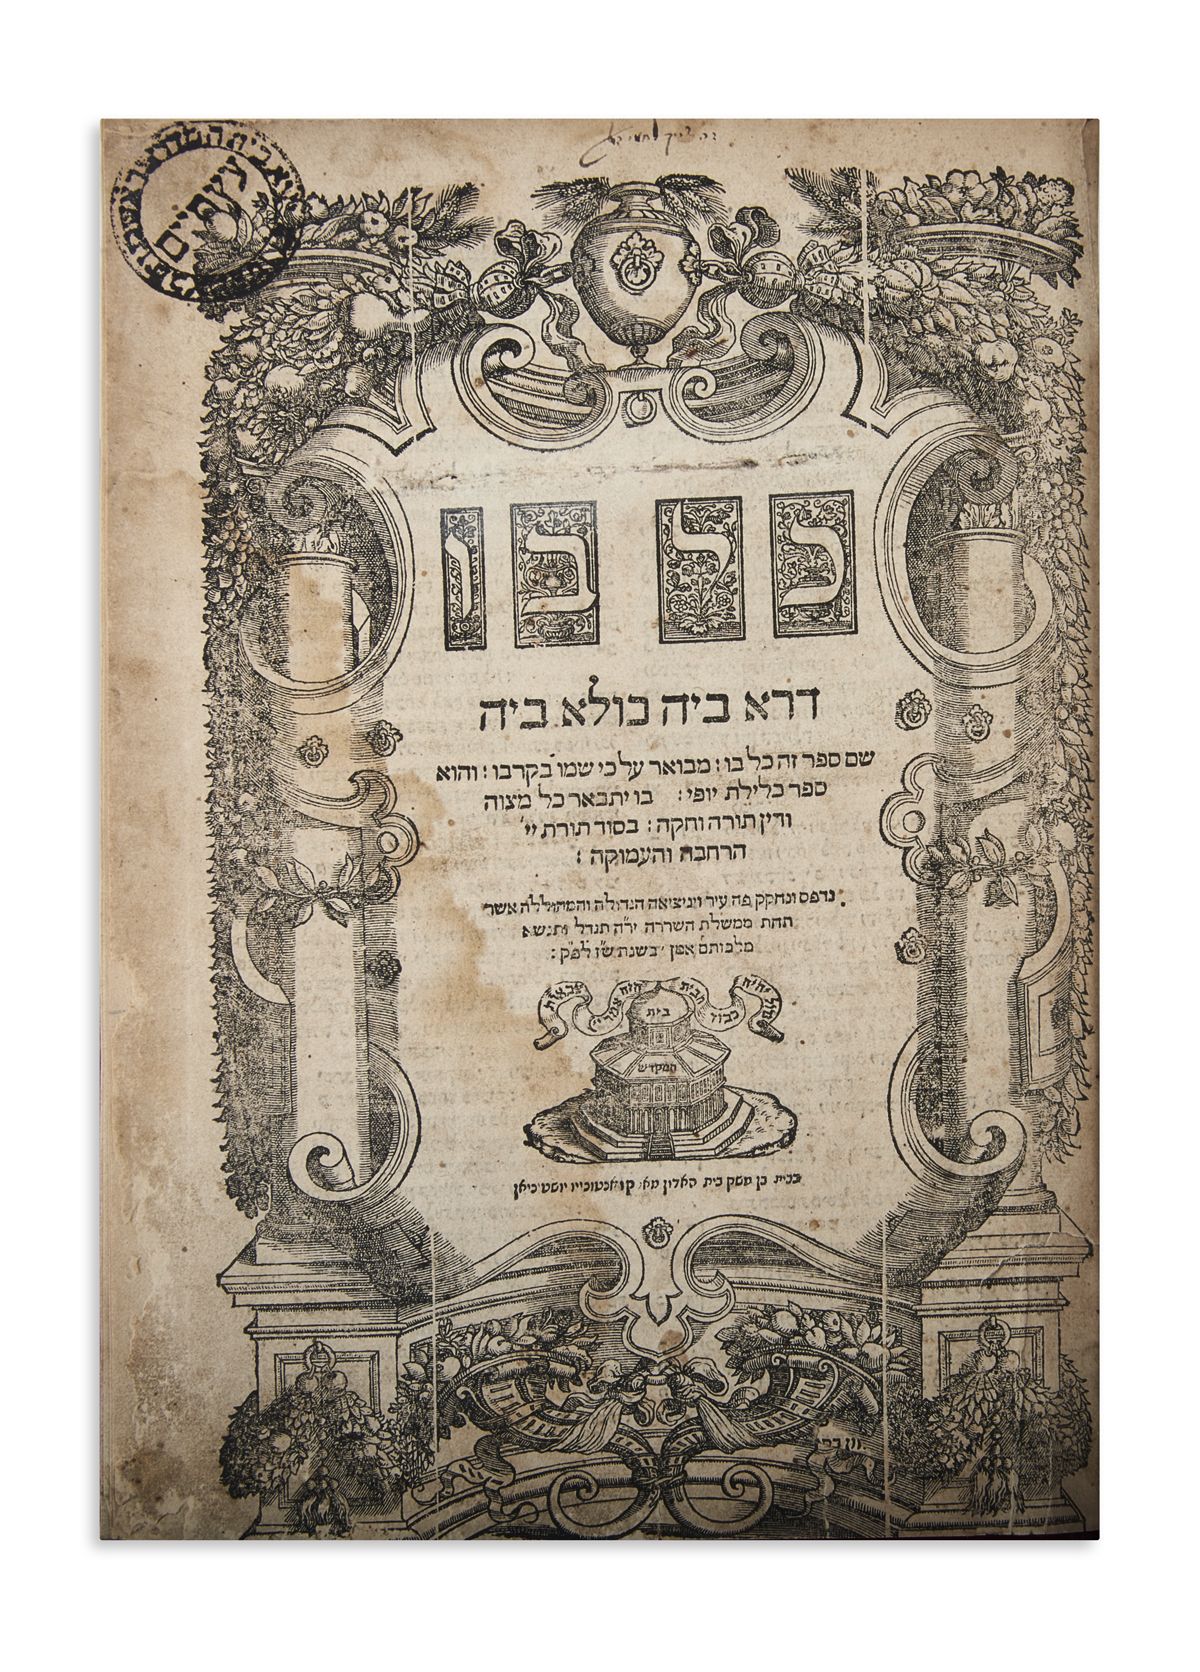 [“Omnia in Eo:” compendium of Jewish Law]. (Attributed to Aharon HaKohen of Lunel).